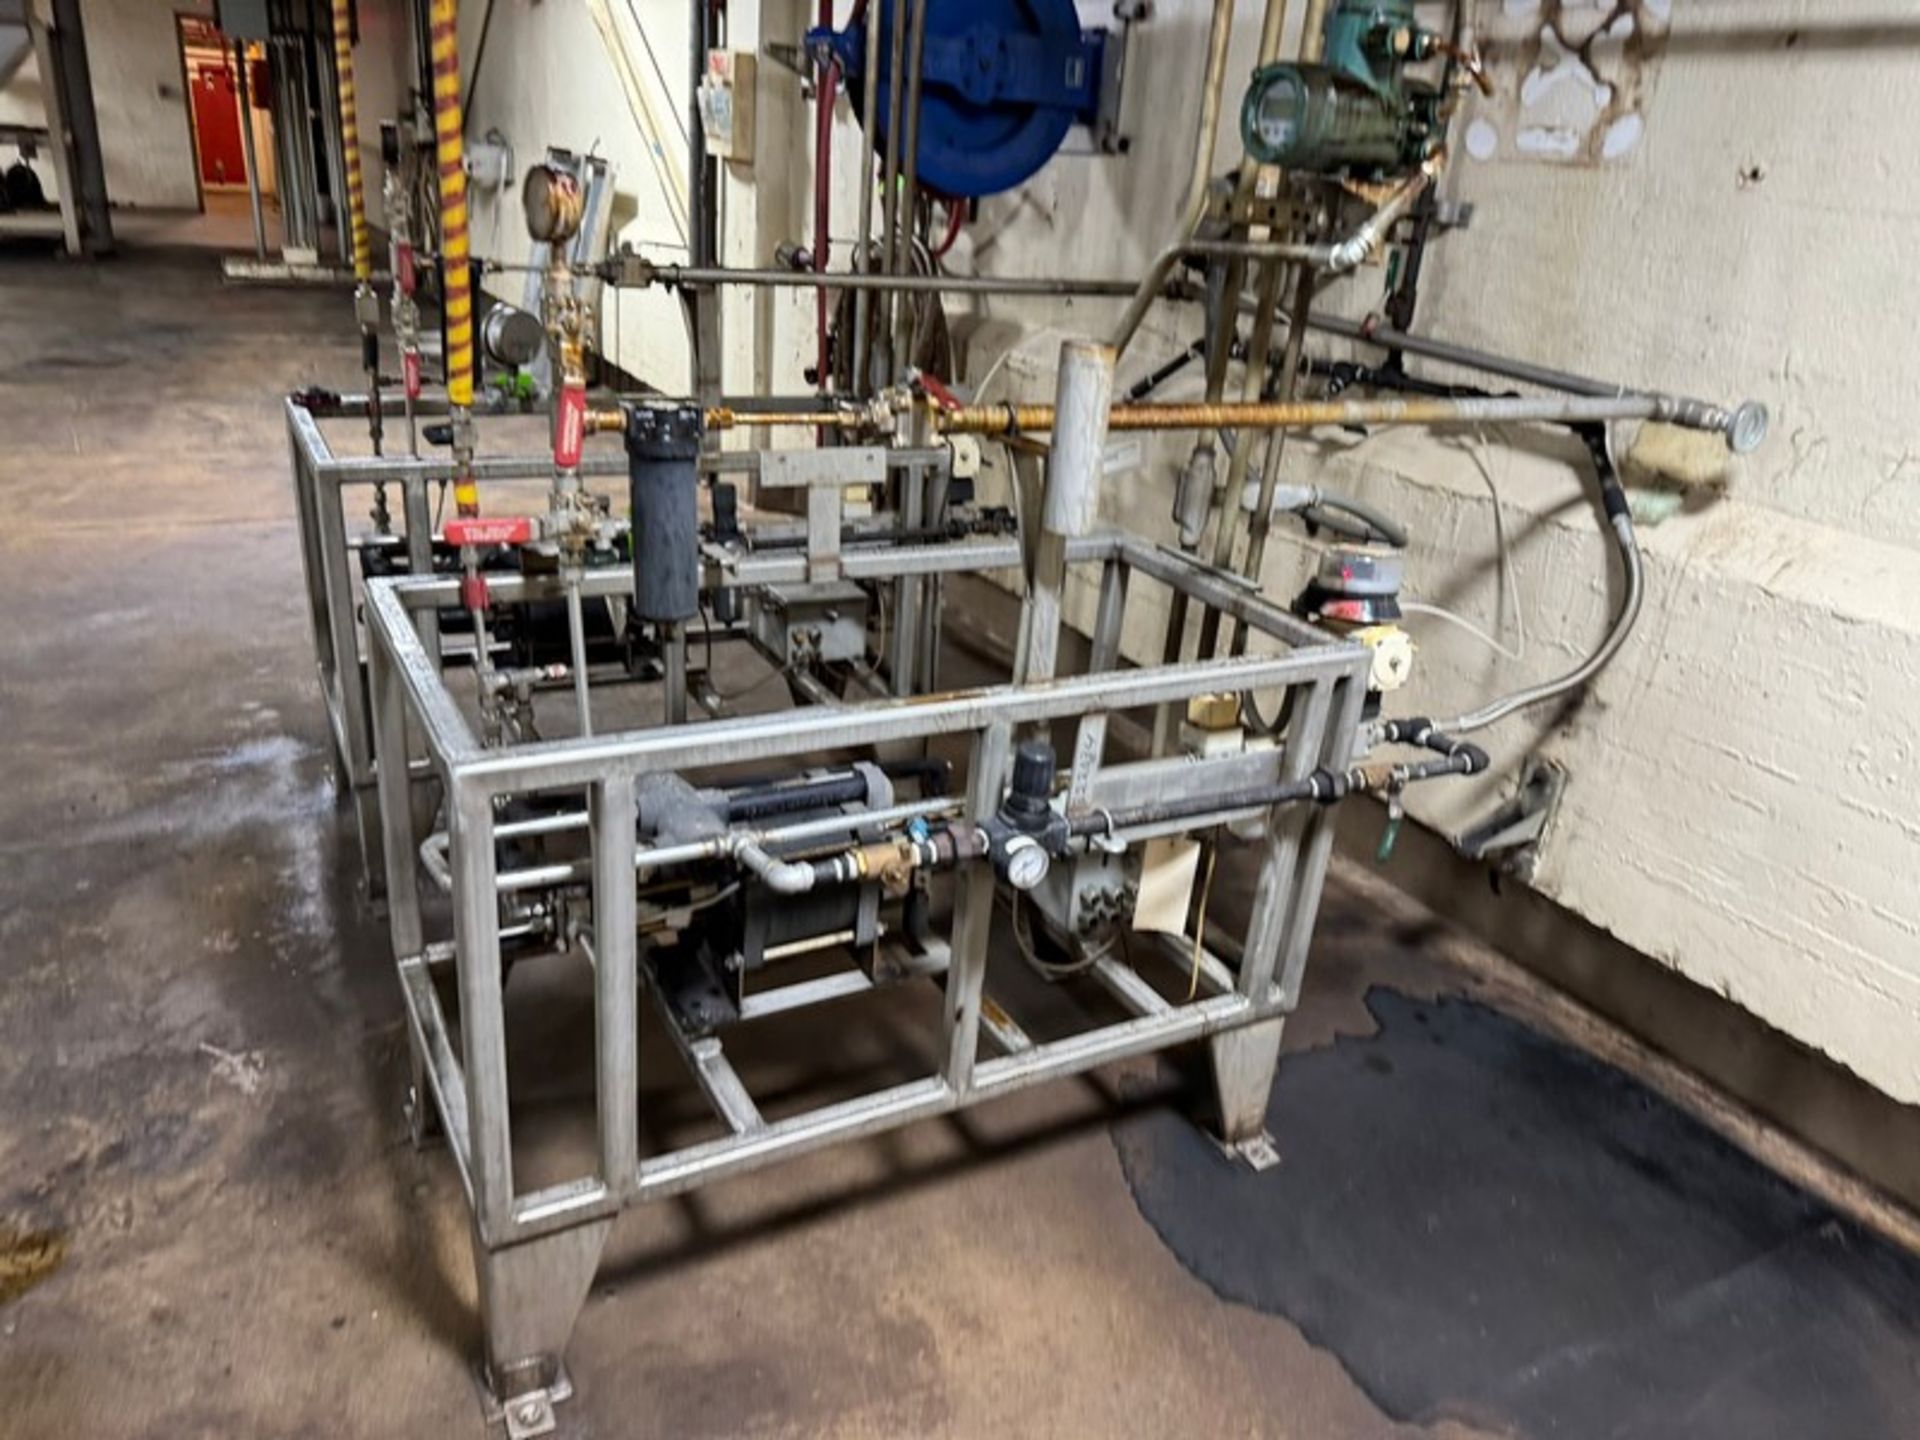 Hasket Gas Booster Skid, M/N BACT-14/30, Mounted on S/S Skid (LOCATED IN FREEHOLD, N.J.) - Image 2 of 4